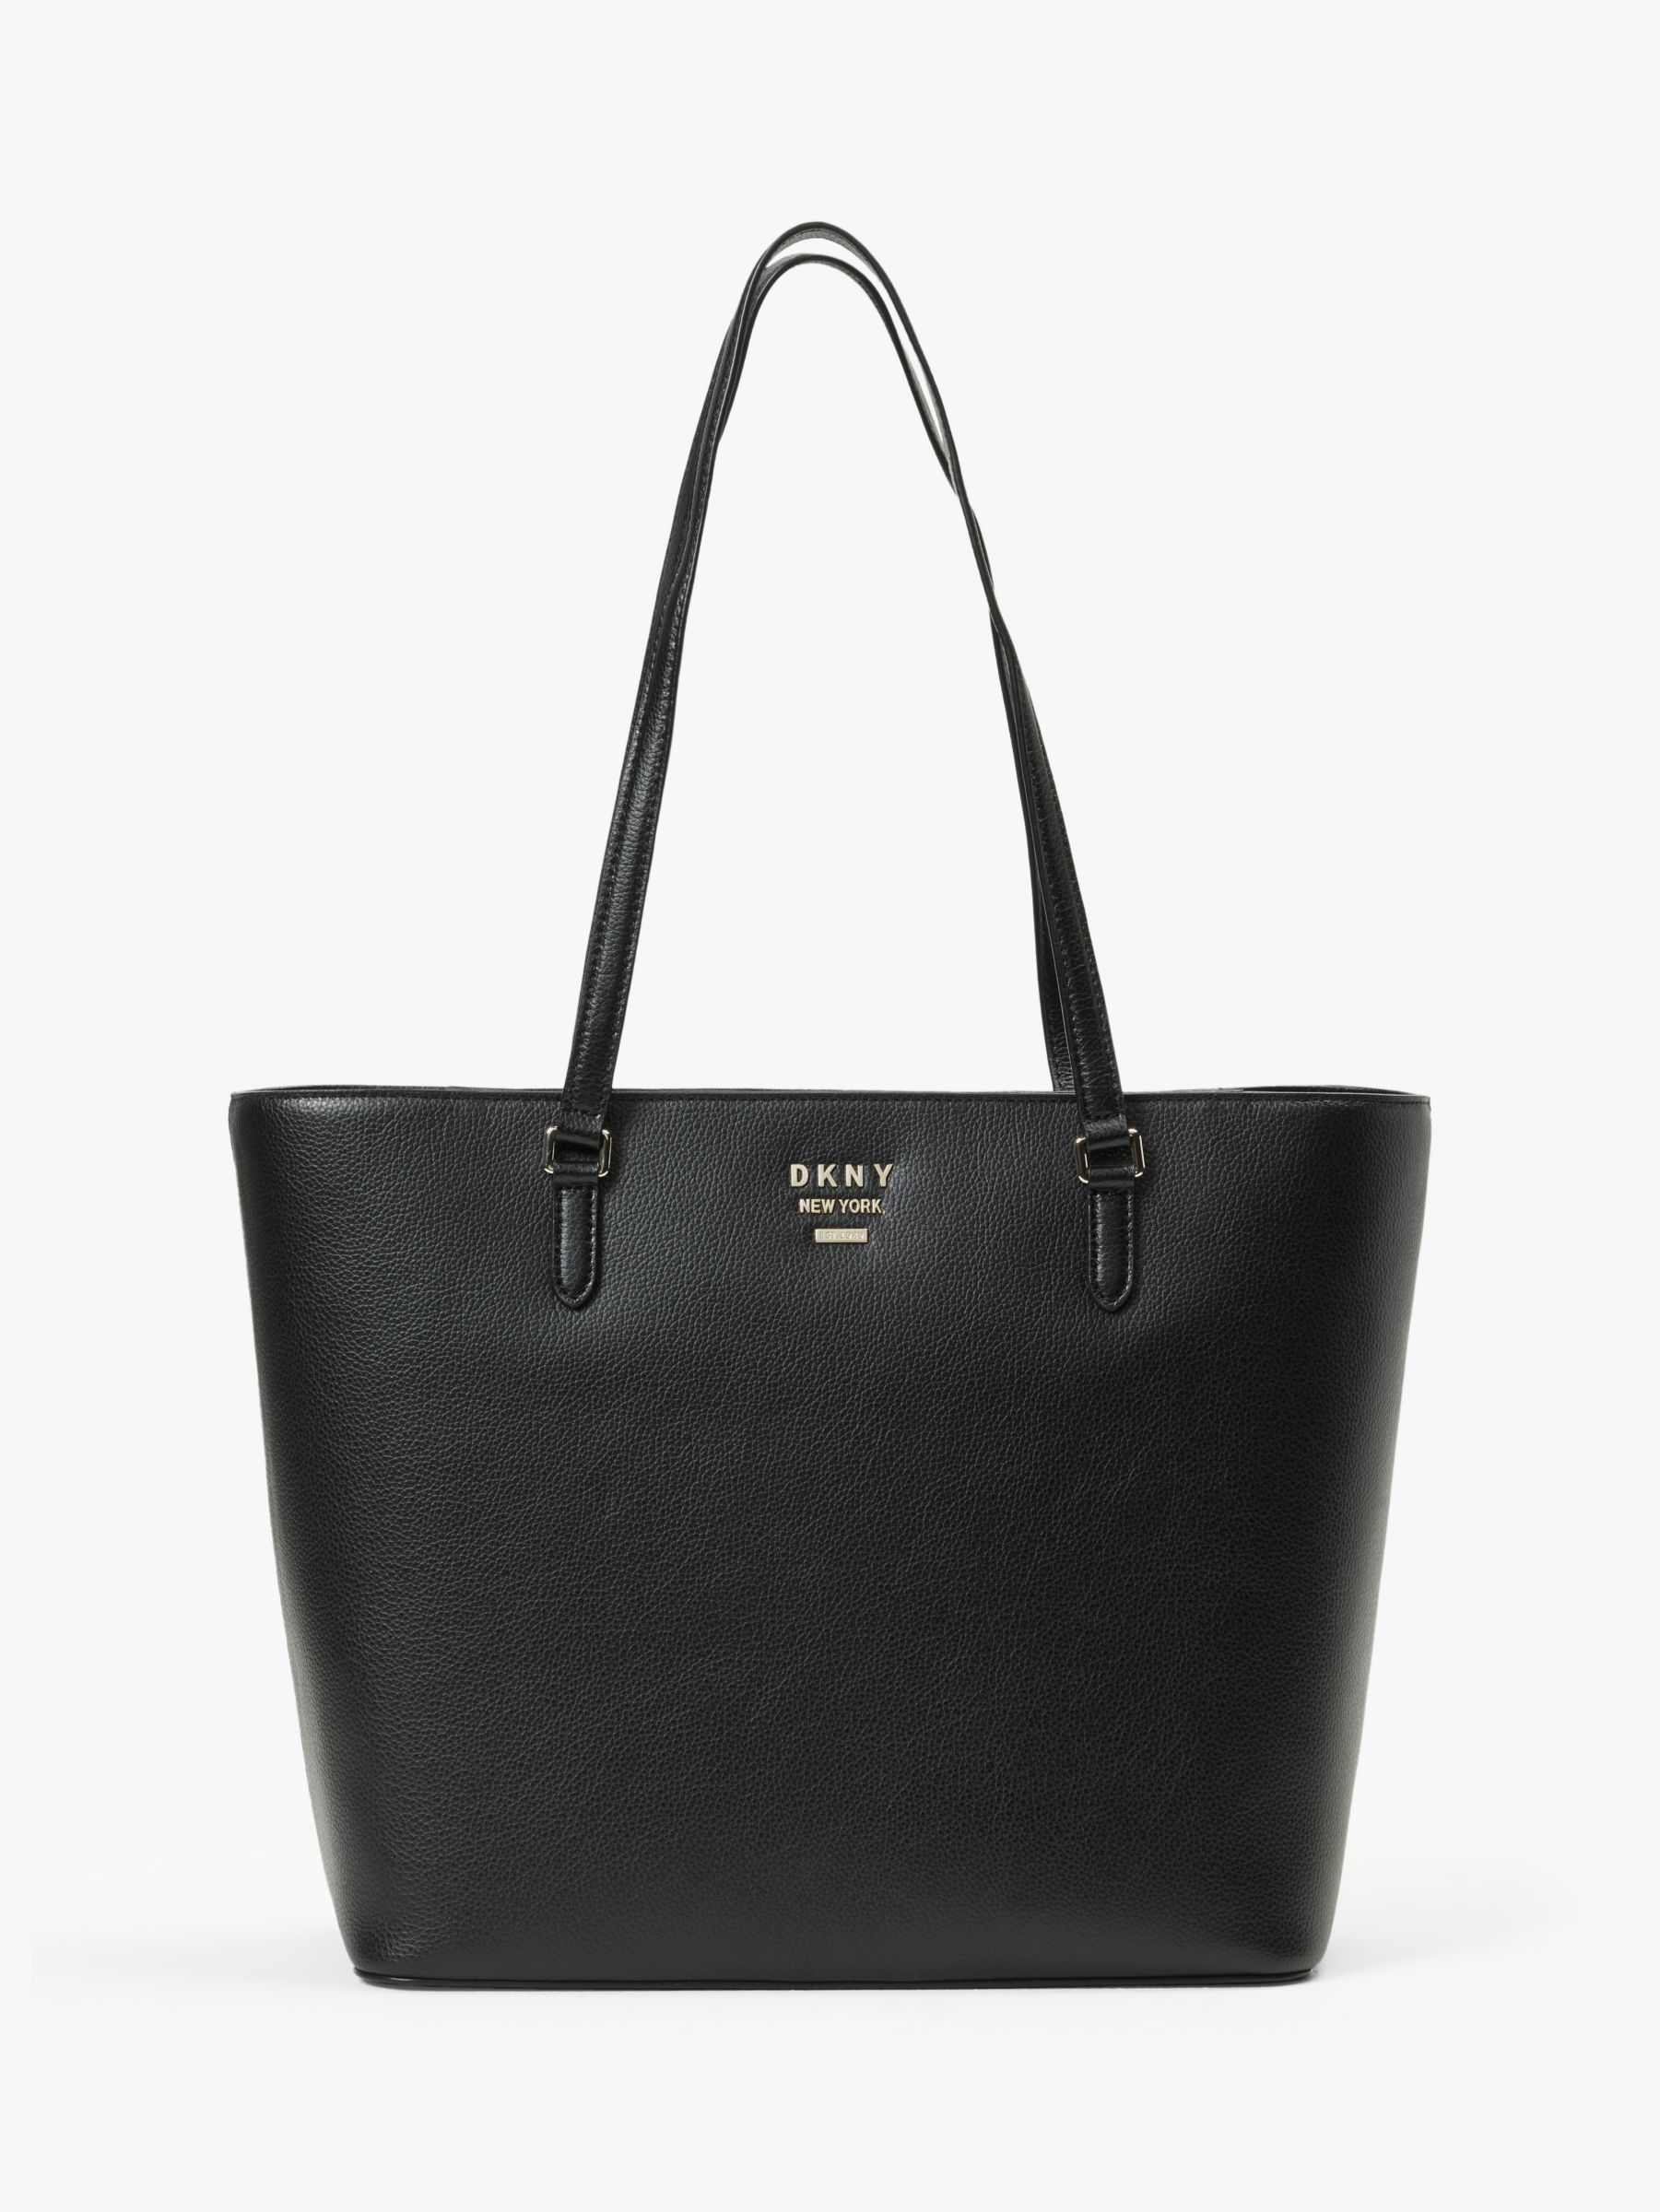 DKNY Whitney Large Leather Tote Bag at John Lewis & Partners